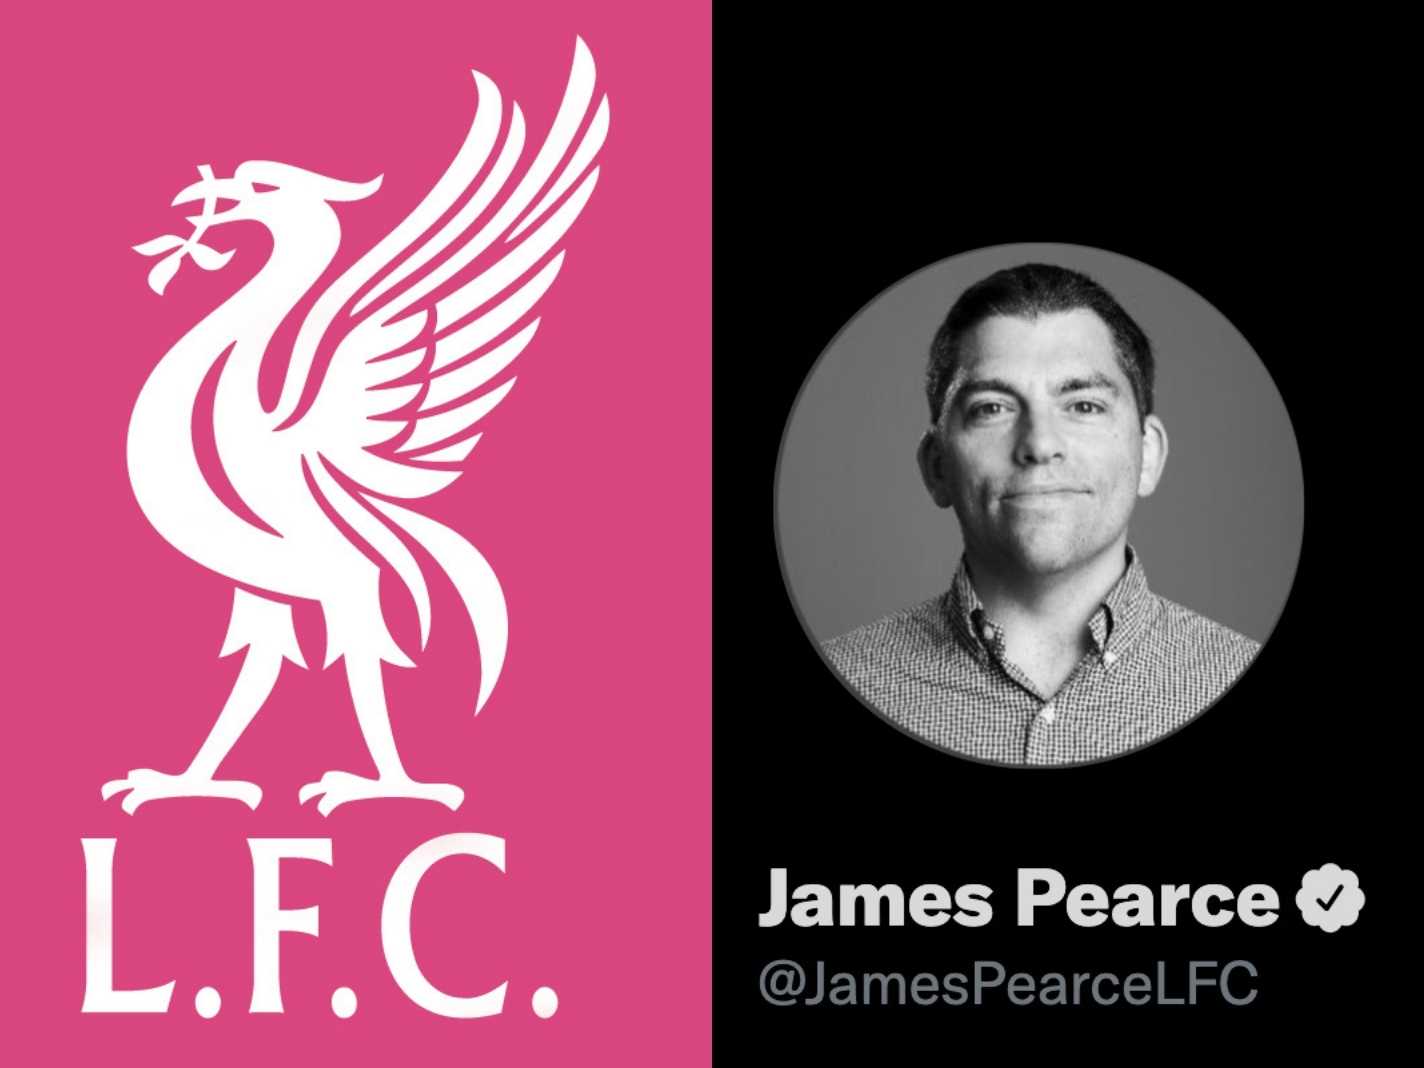 Liverpool journo James Pearce embroiled in racism row? – Here’s what we know